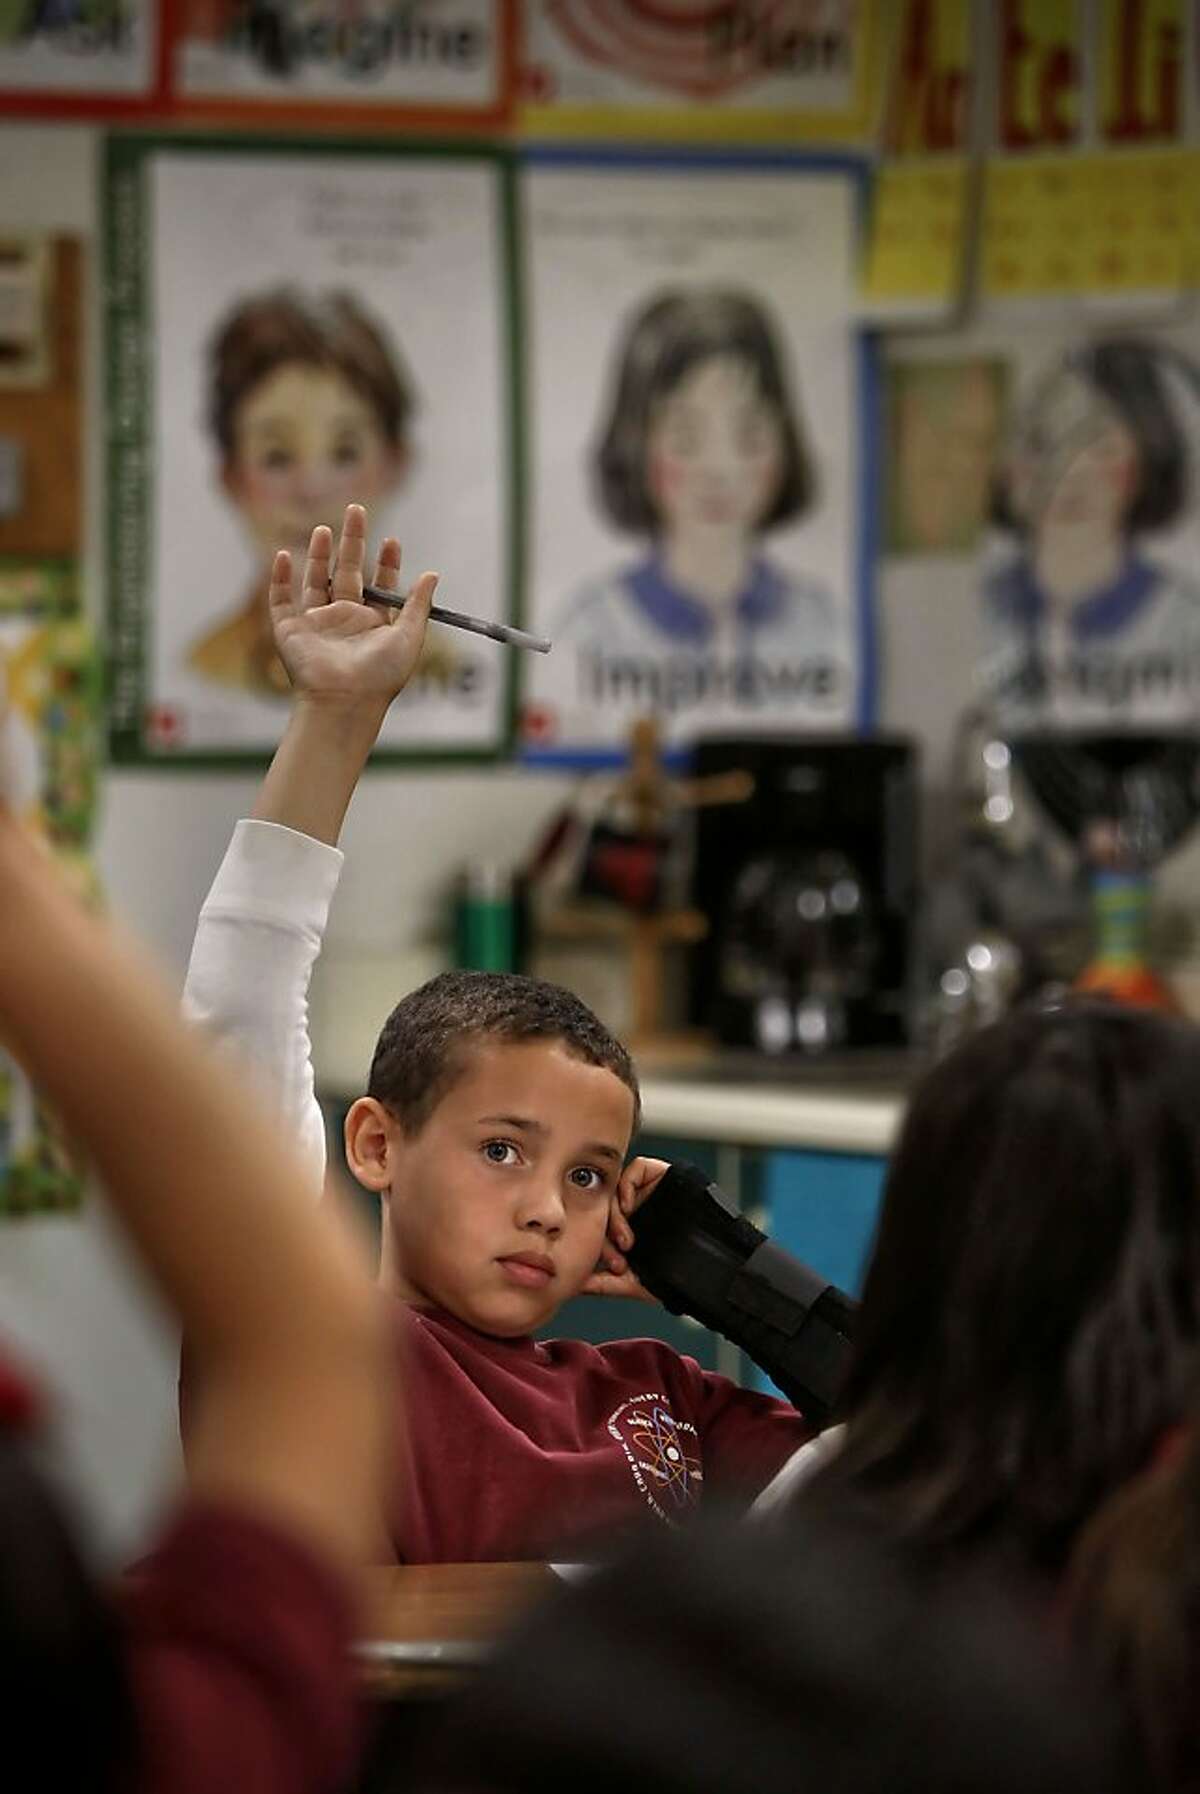 Xander Carradine, at 3rd garder in Jennifer Benis' class is ready to answer a question at the Lazear Charter Academy in Oakland, Ca., on Tuesday Nov. 12, 2013. Lazear is among 40 charter schools throughout the City of Oakland. One school board member has decided to vote against allowing any new charter schools.